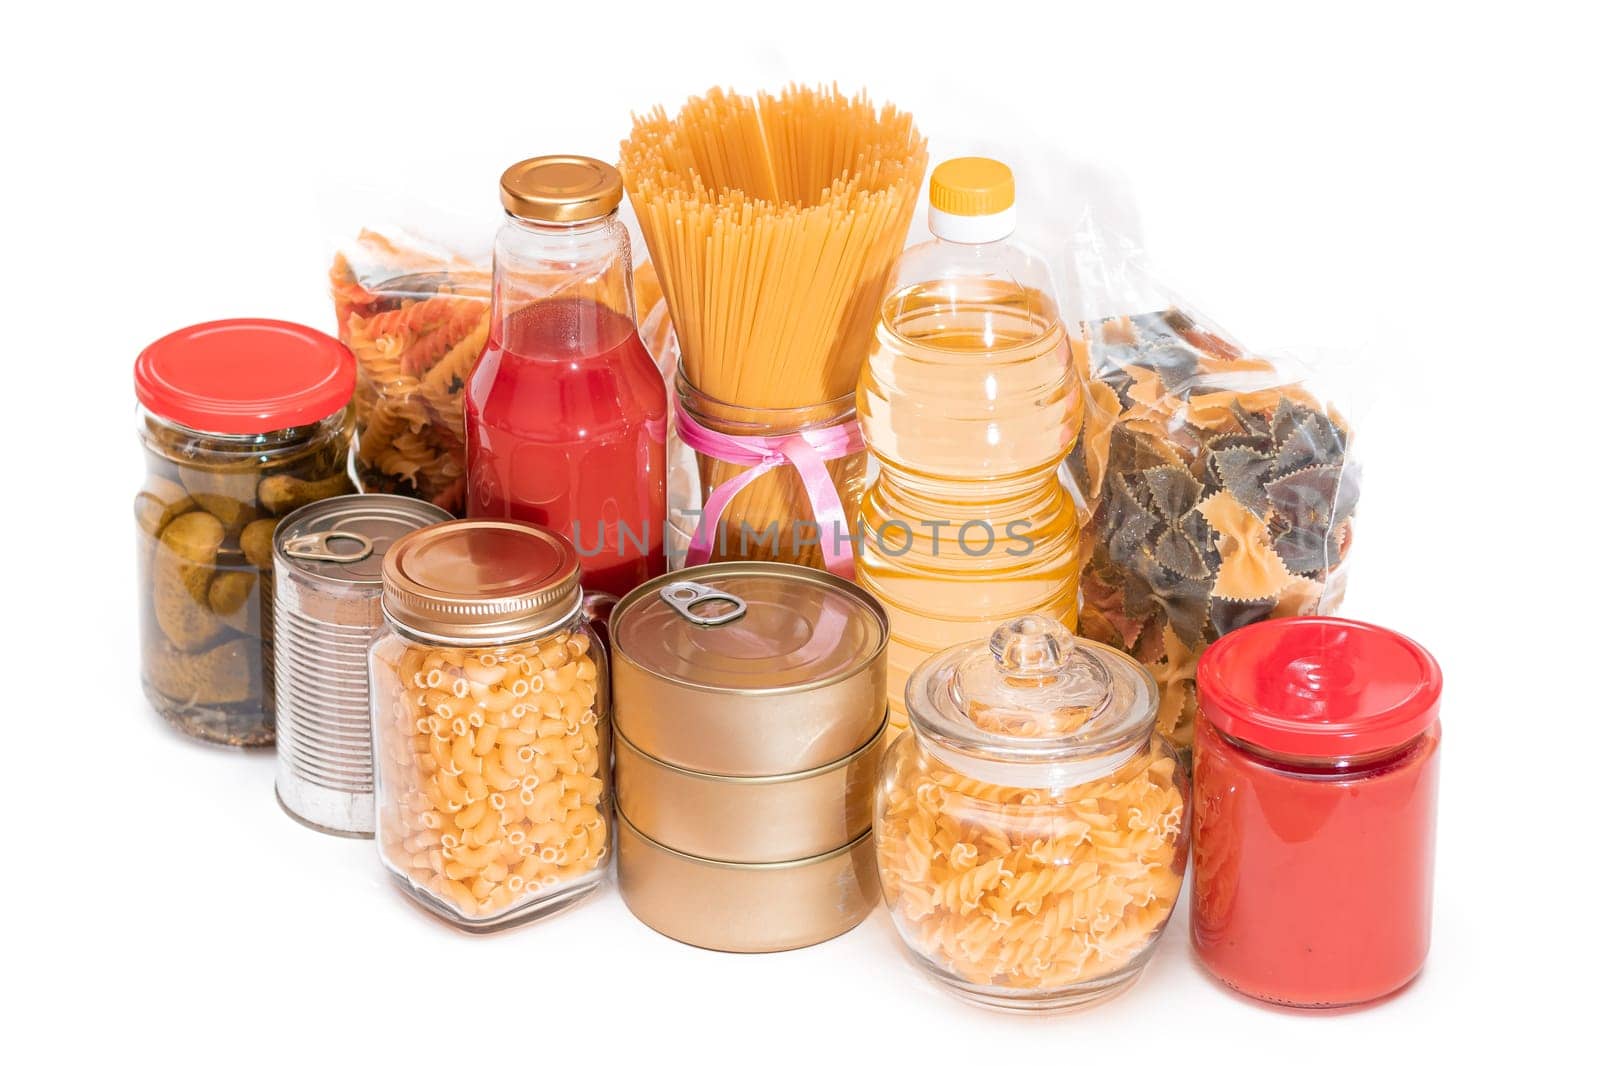 Canned Food, Spaghetti, Tomato Juice, Pasta and Grocery - Isolated on White Background by InfinitumProdux